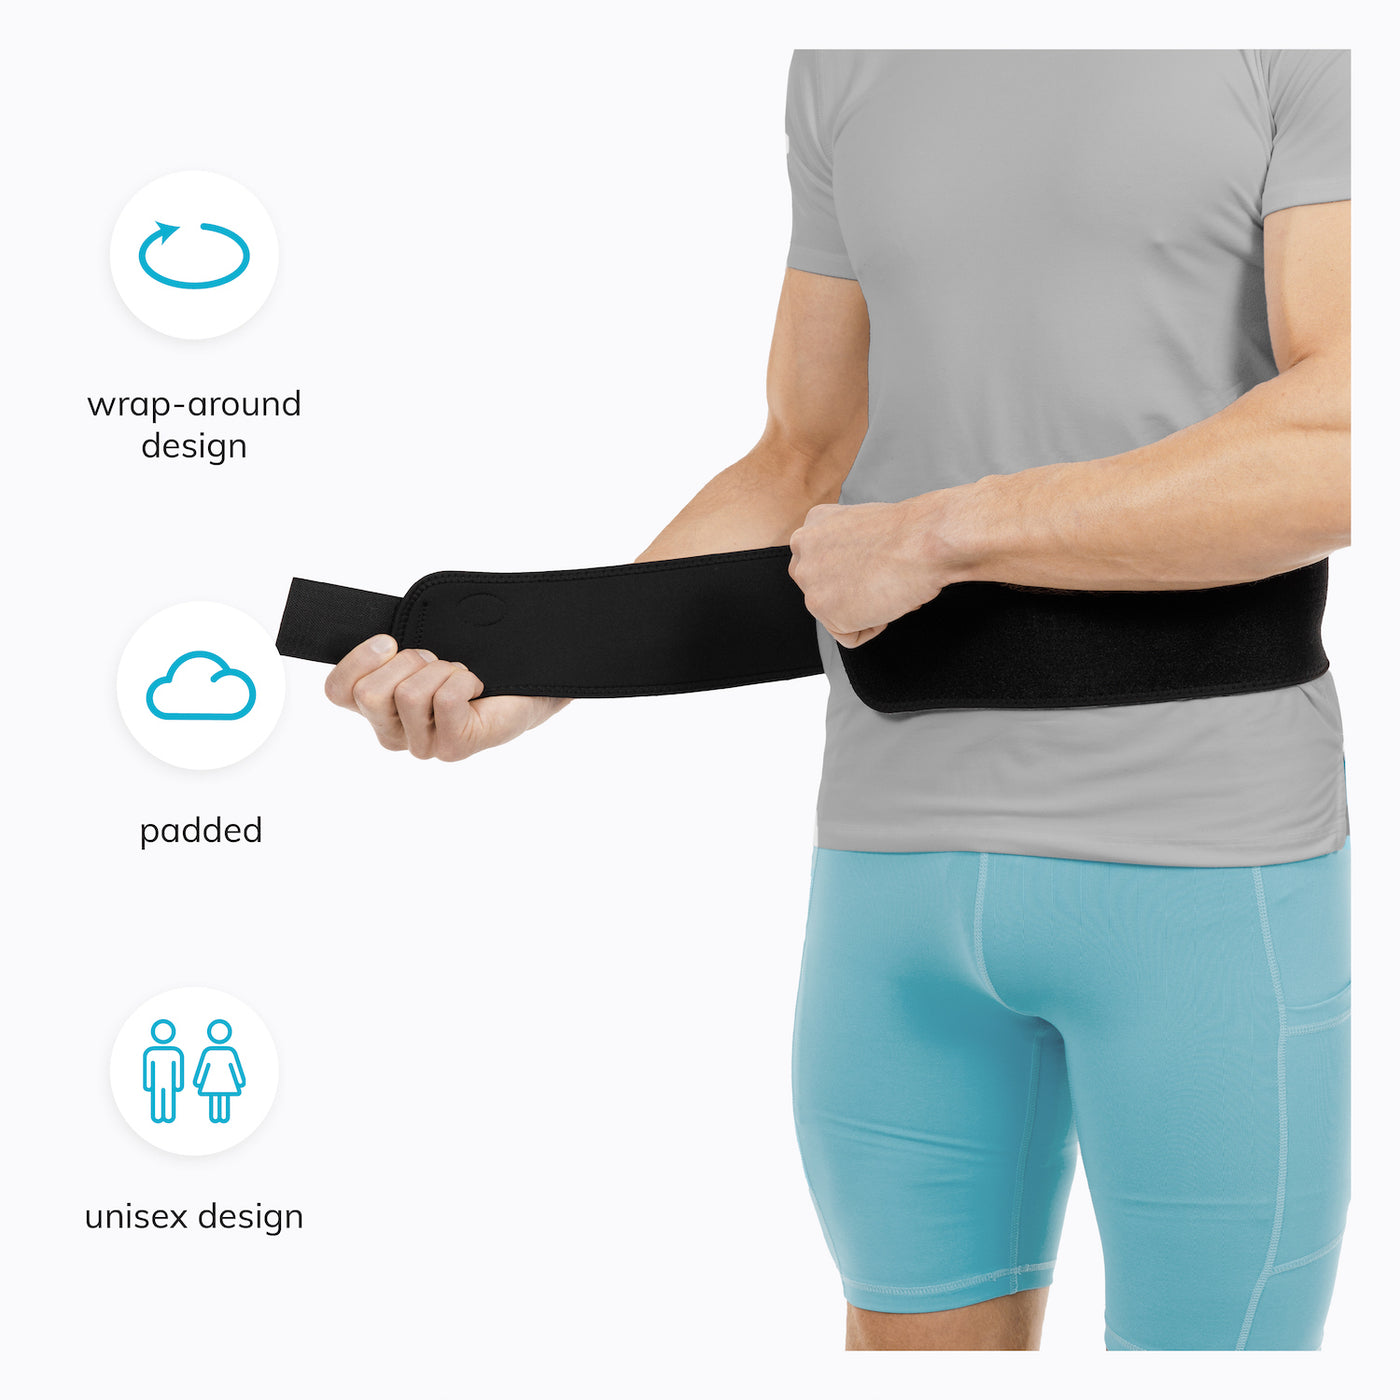 Our black hip belt is a wrap-around brace to reduce SI joint inflammation